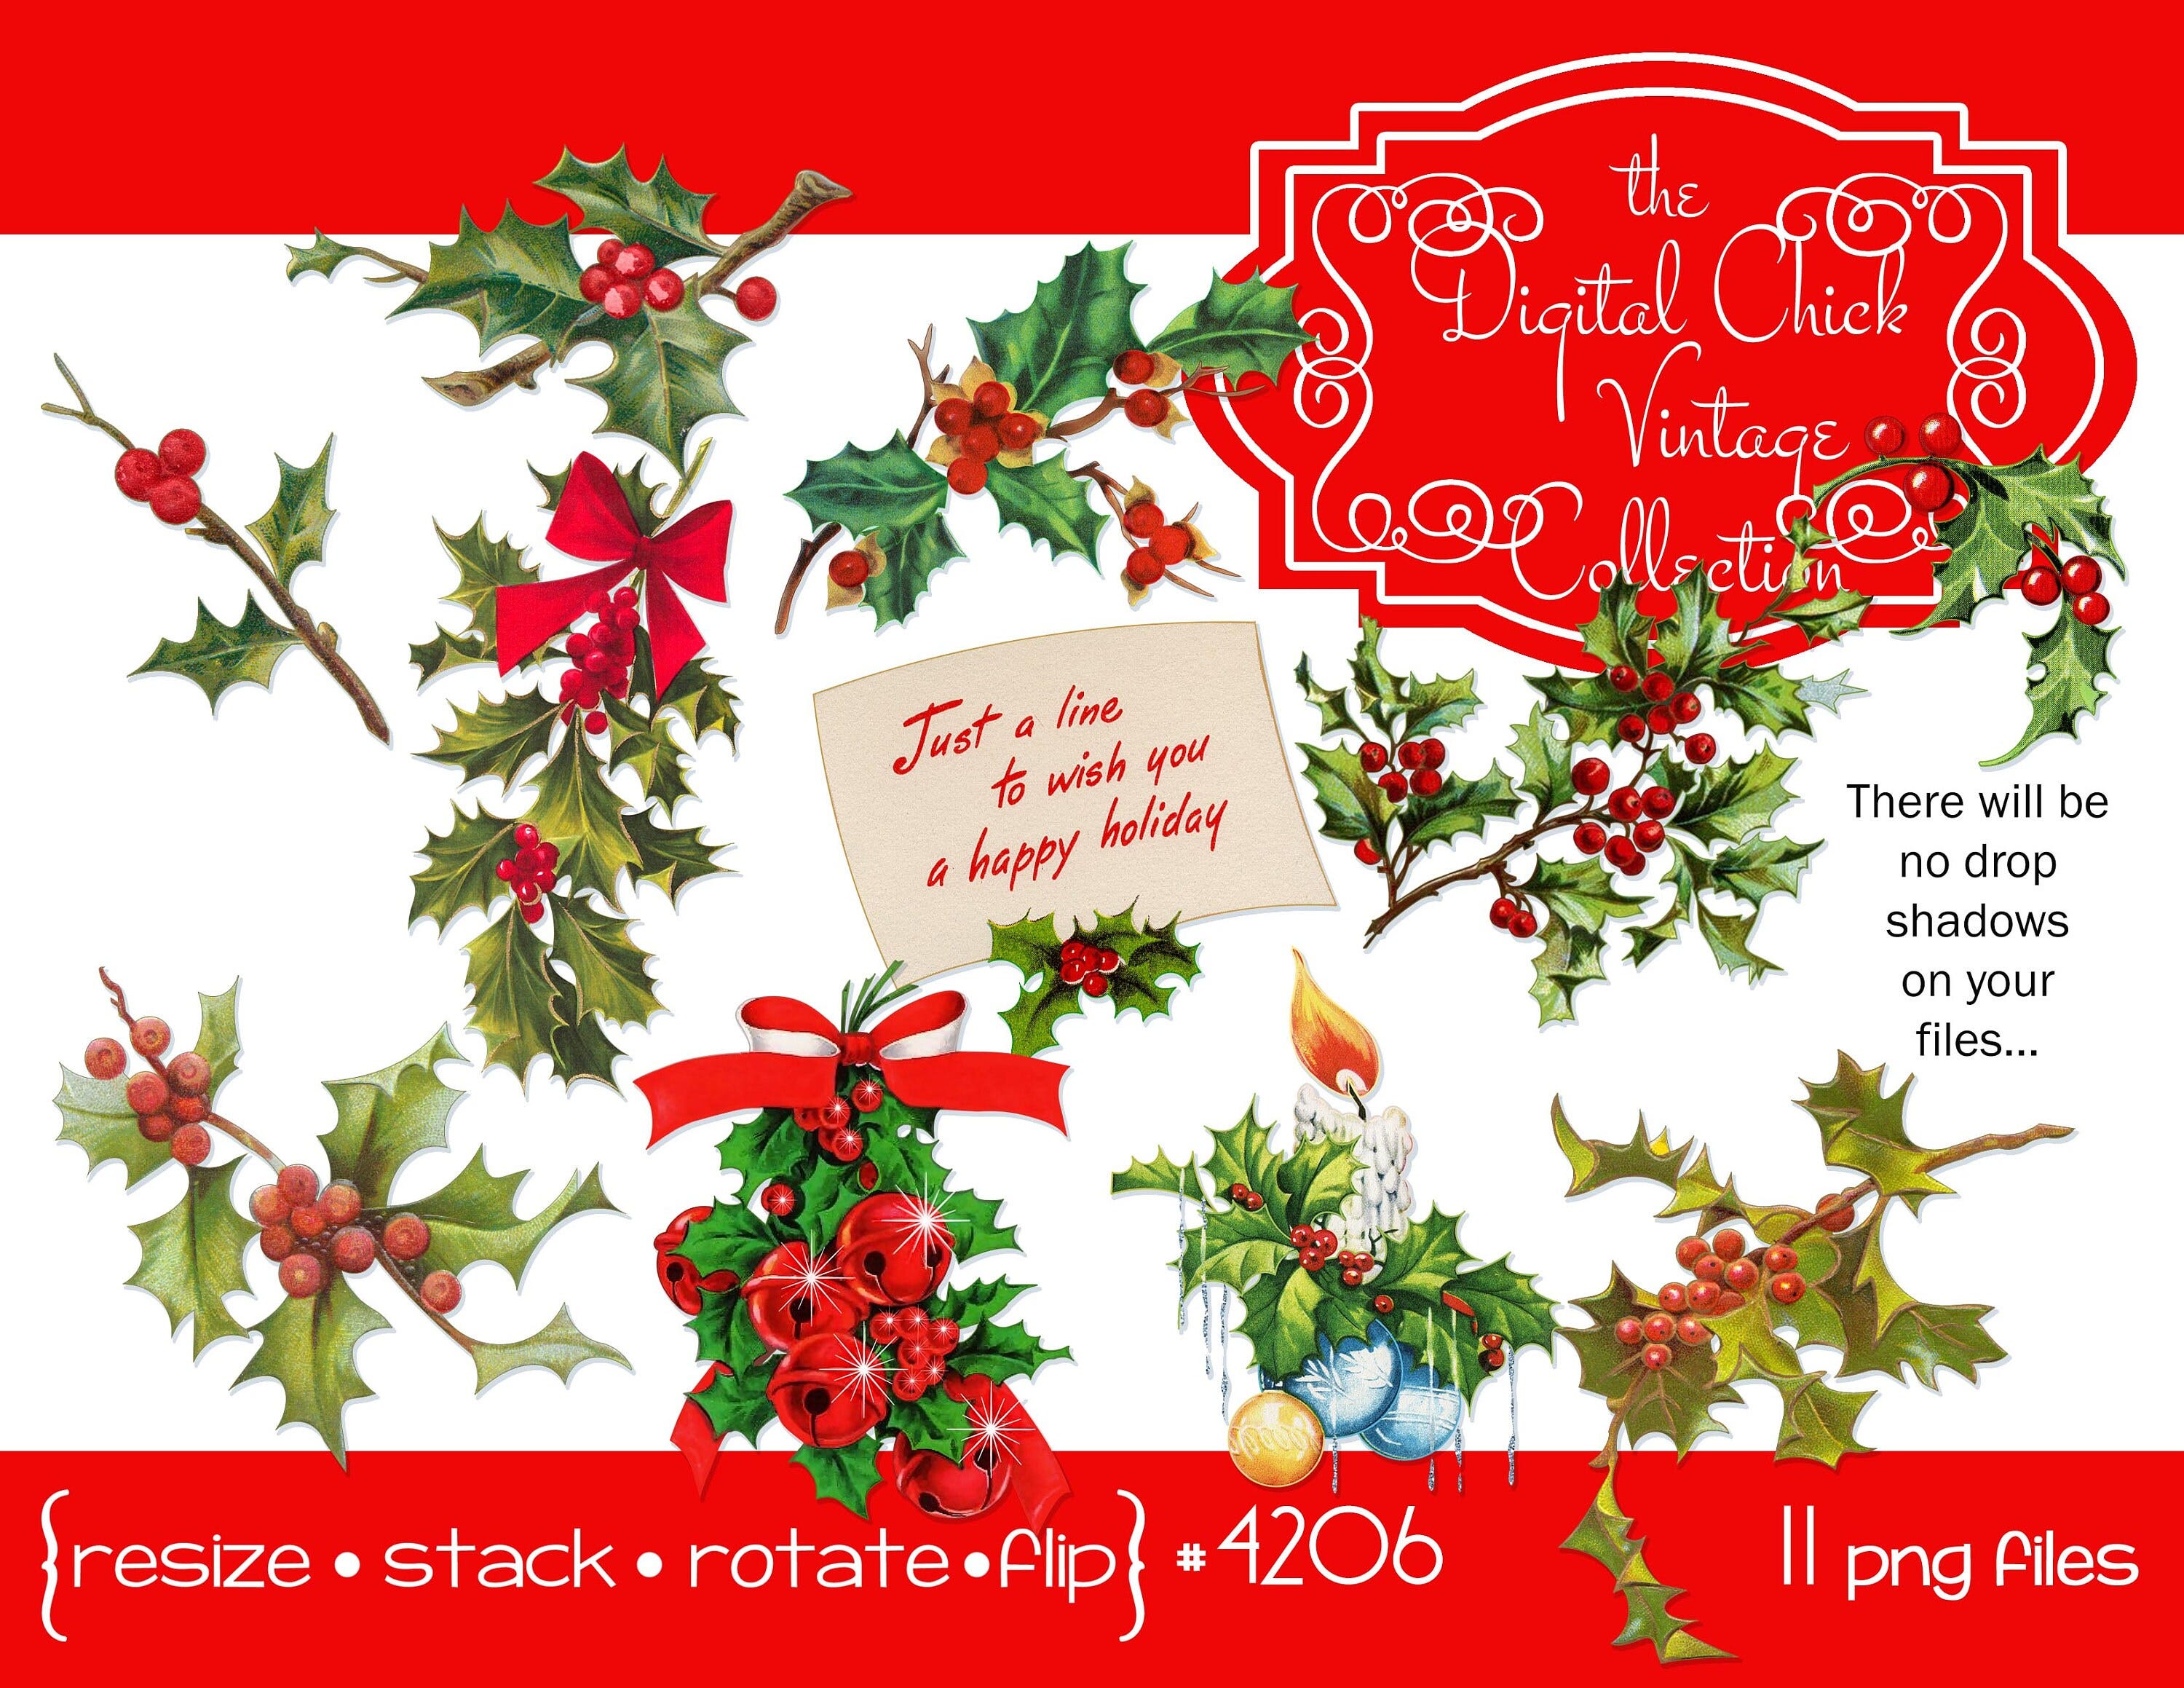 Digital clipart, Instant Download, Christmas greeting card images, holly ribbon jingle bells greetings candles berries--png files  4206